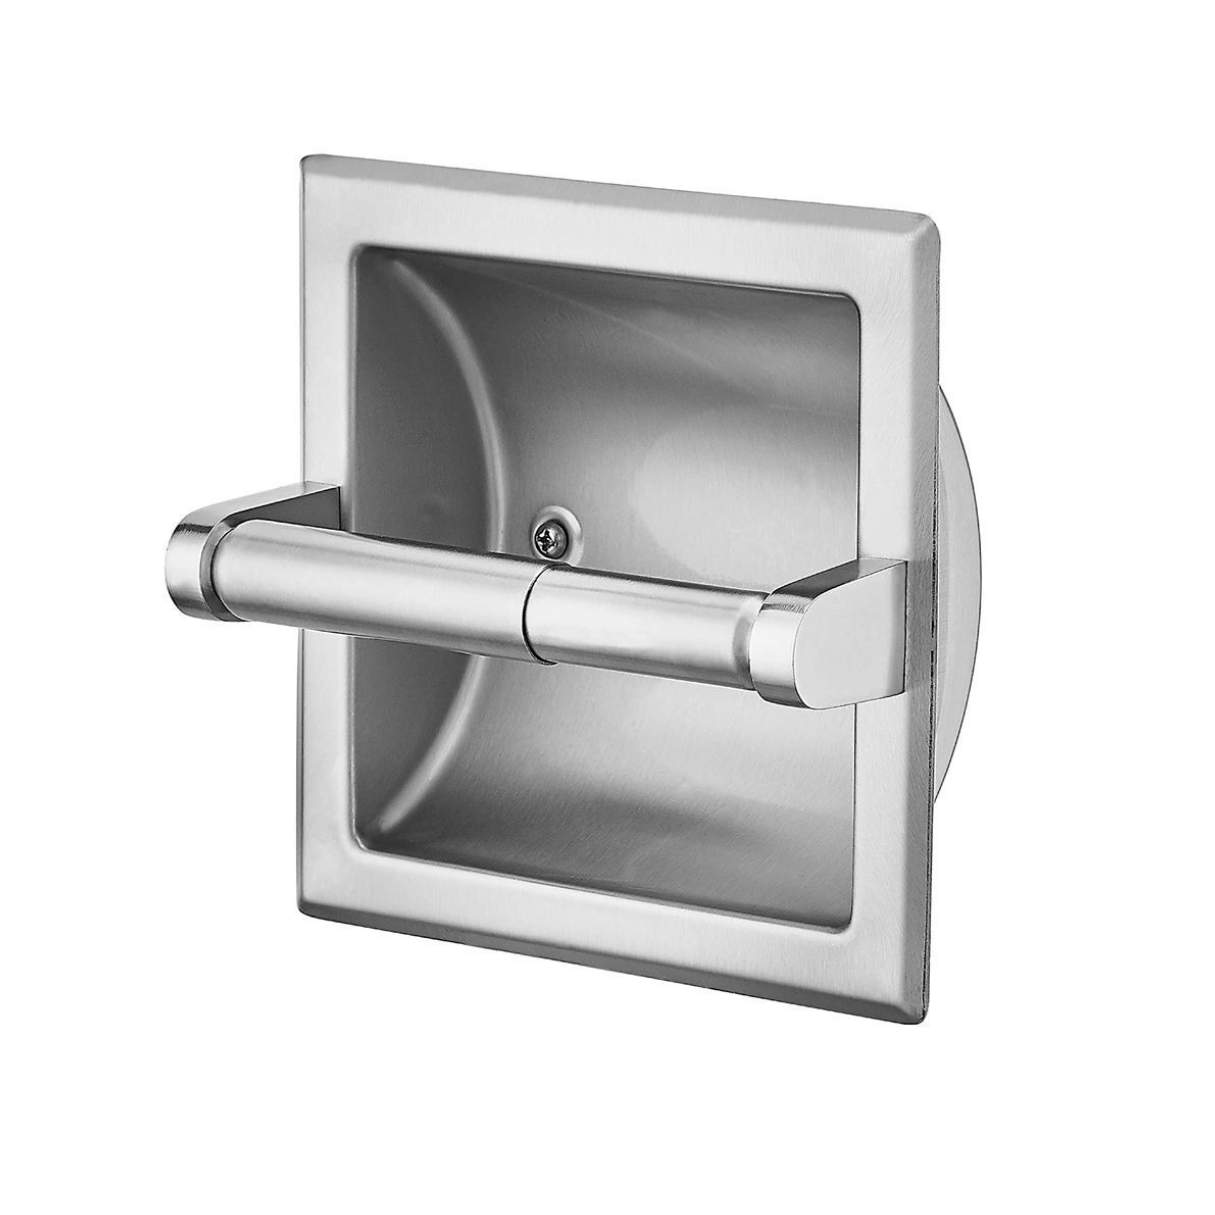 What To Look For In A Recessed Toilet Paper Holder